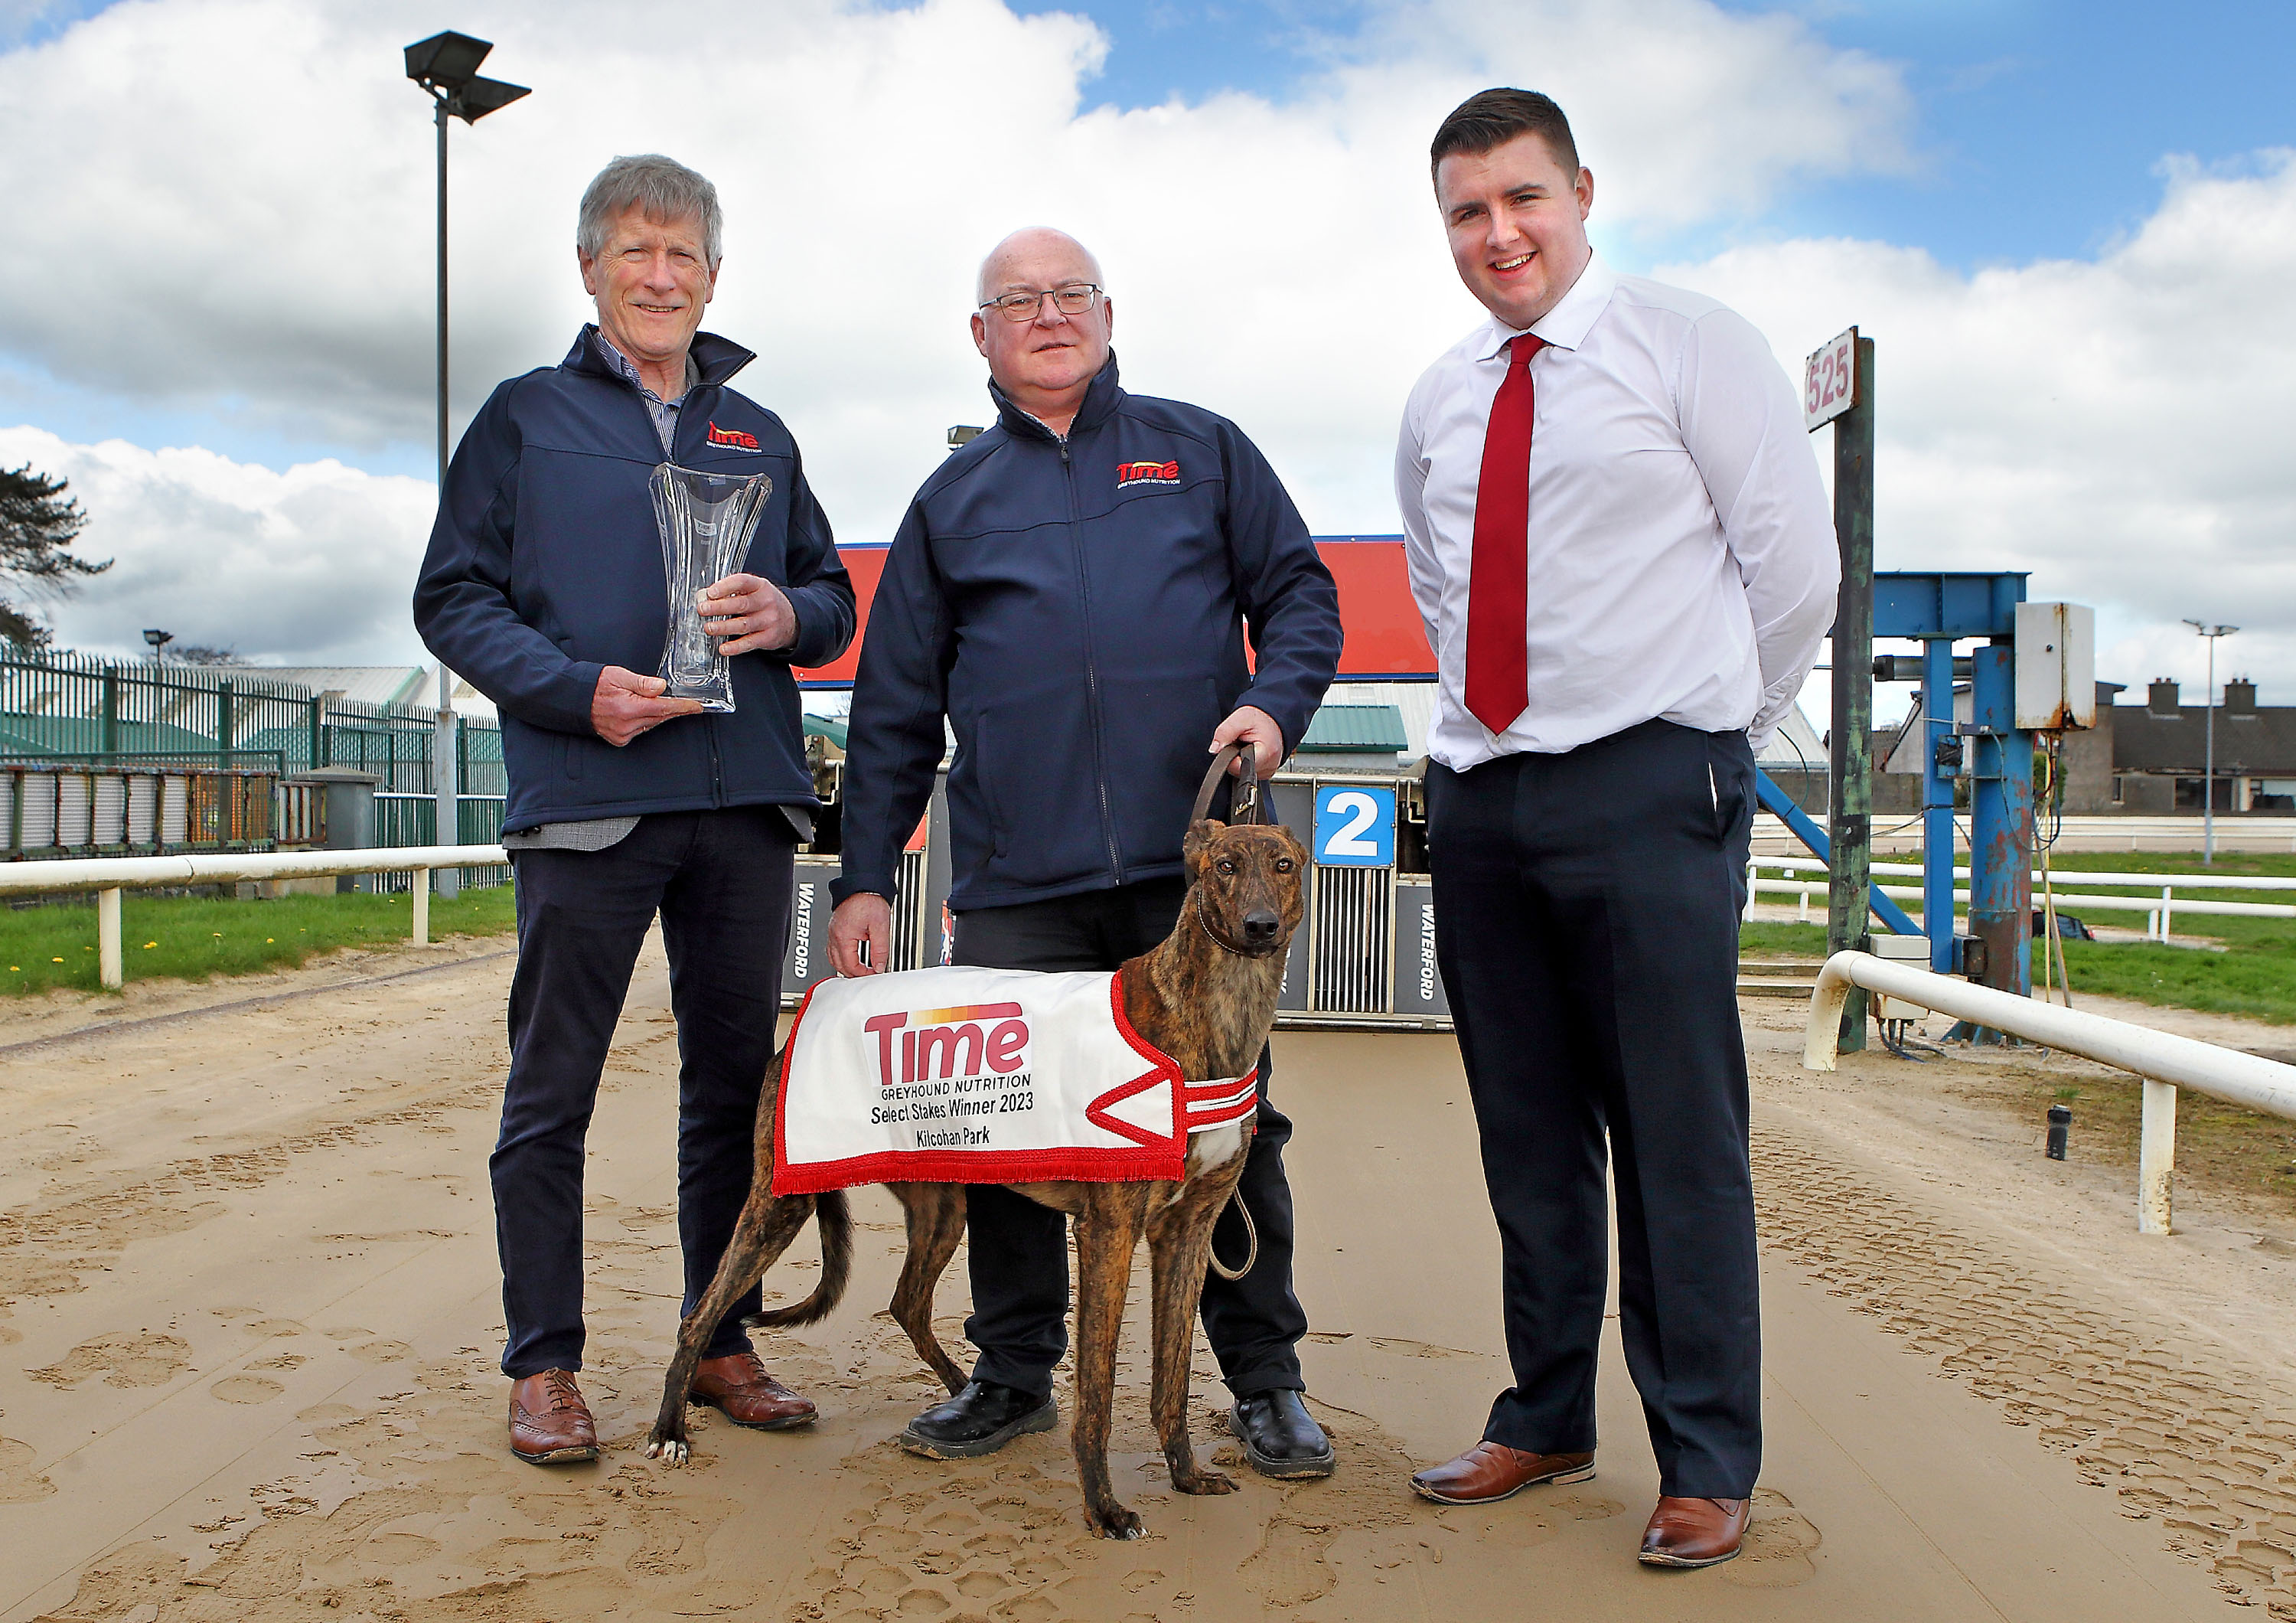 John Fox (Time Greyhound Nutrition), Willie Rigney (Time Greyhound Nutrition) and Ian Magnier (Racing Manager, Kilcohan Park Greyhound Stadium) announcing the details for the sponsorship of the Time Select Stakes due to start on Saturday 15th April with €10,000 to the winner.  Photo:  Noel Browne - Repro Free